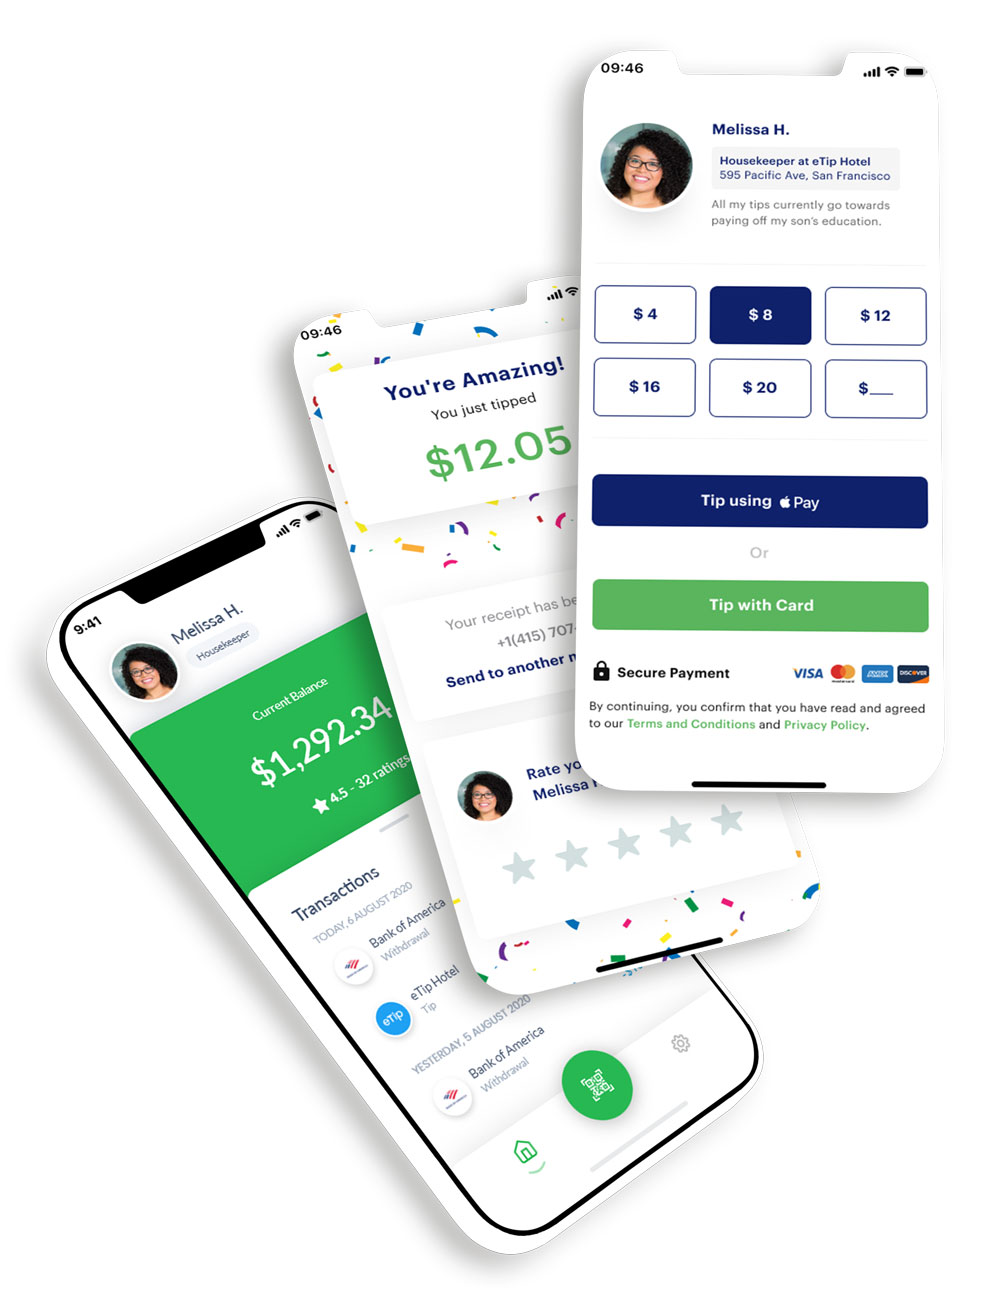 Tipping Use Cases - Cashless Tipping App